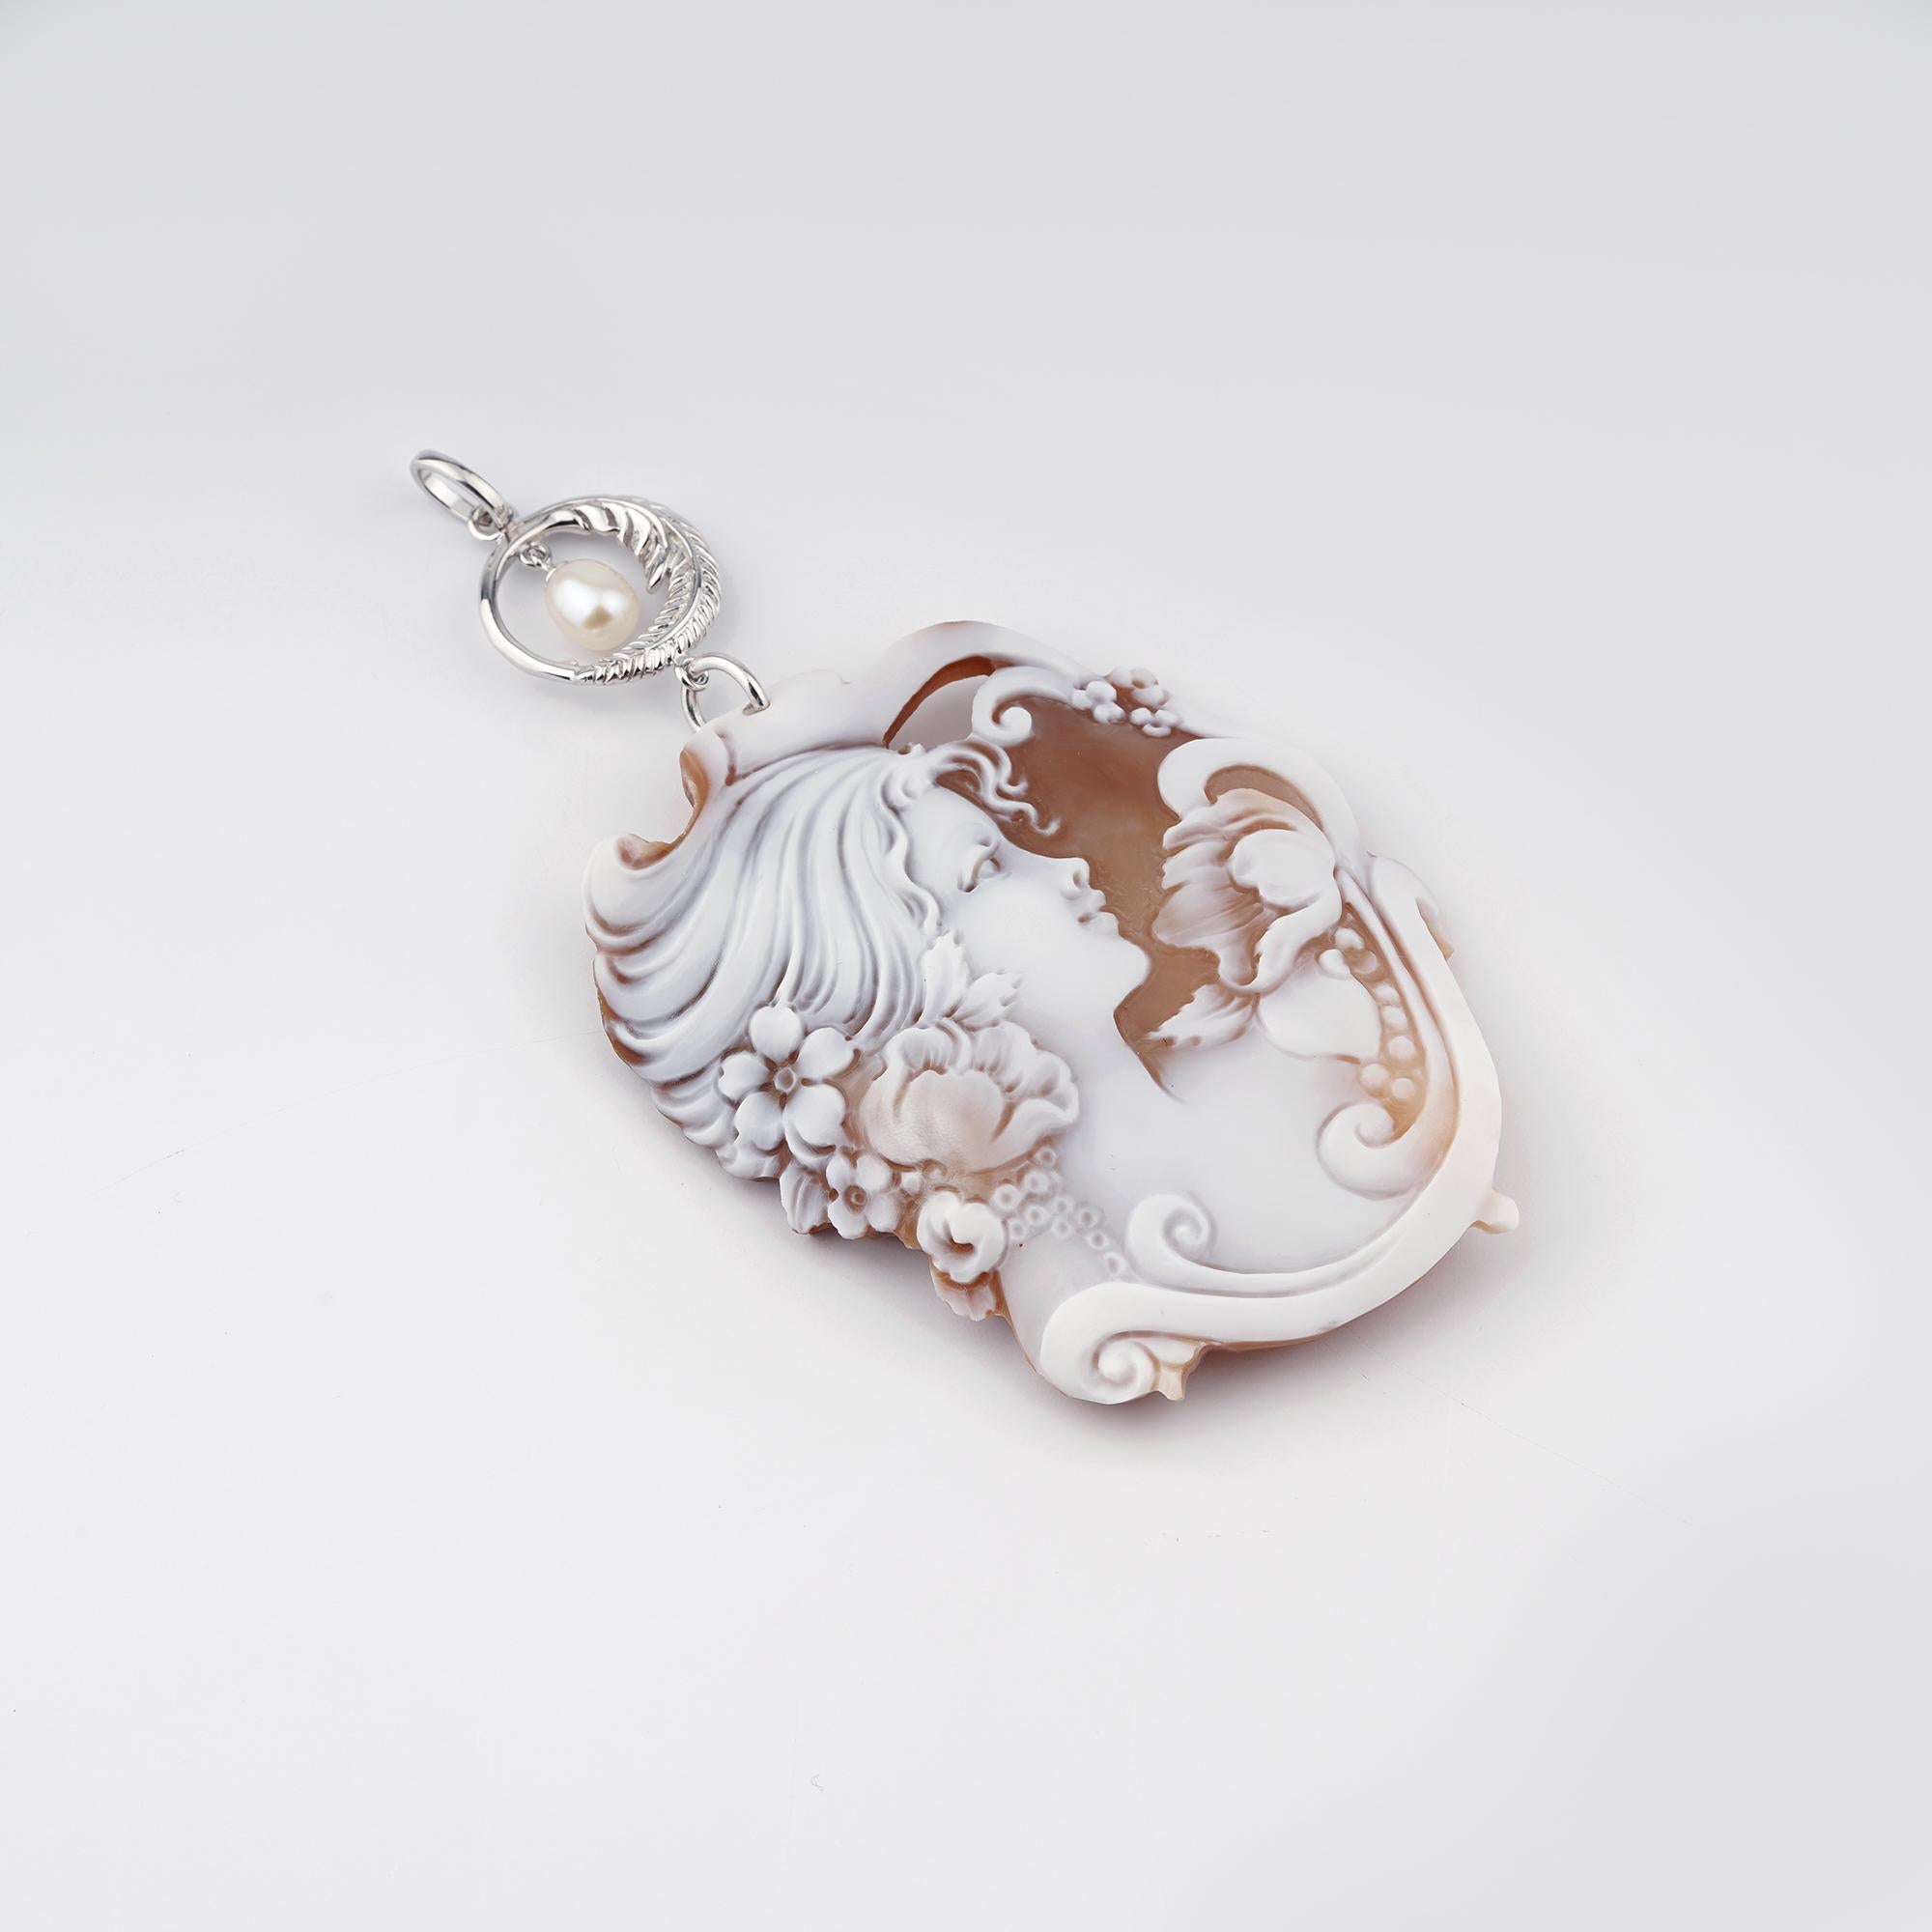 18 carat Gold Plated 925 Sterling Silver with 63 mm Sea Shell Cameo pendant. Fully handcarved woman Portrait on a sea shell cameo set in a 18ct  Gold plated silver pendant with fresh water pearls. Carvings are performed by our master artisans with